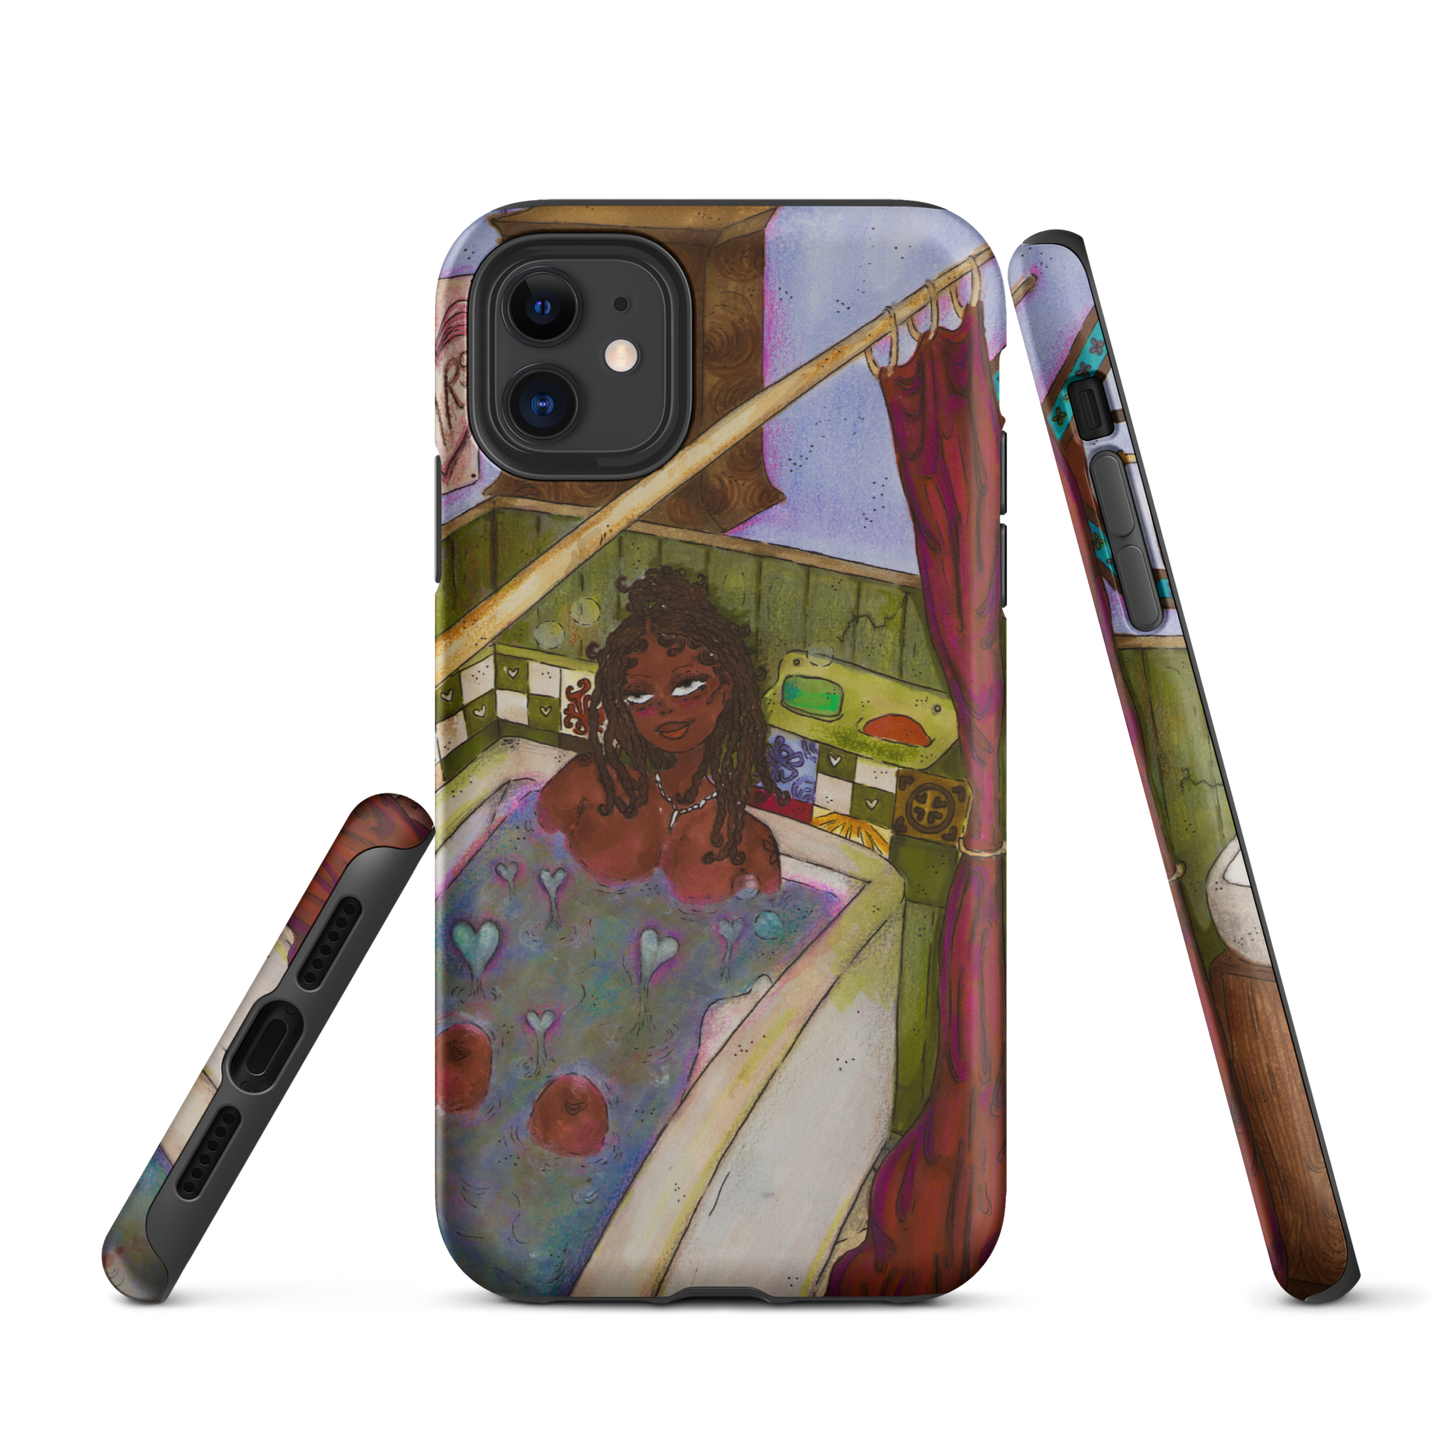 "i forgot loving myself can feel this good" fullcover iphone case